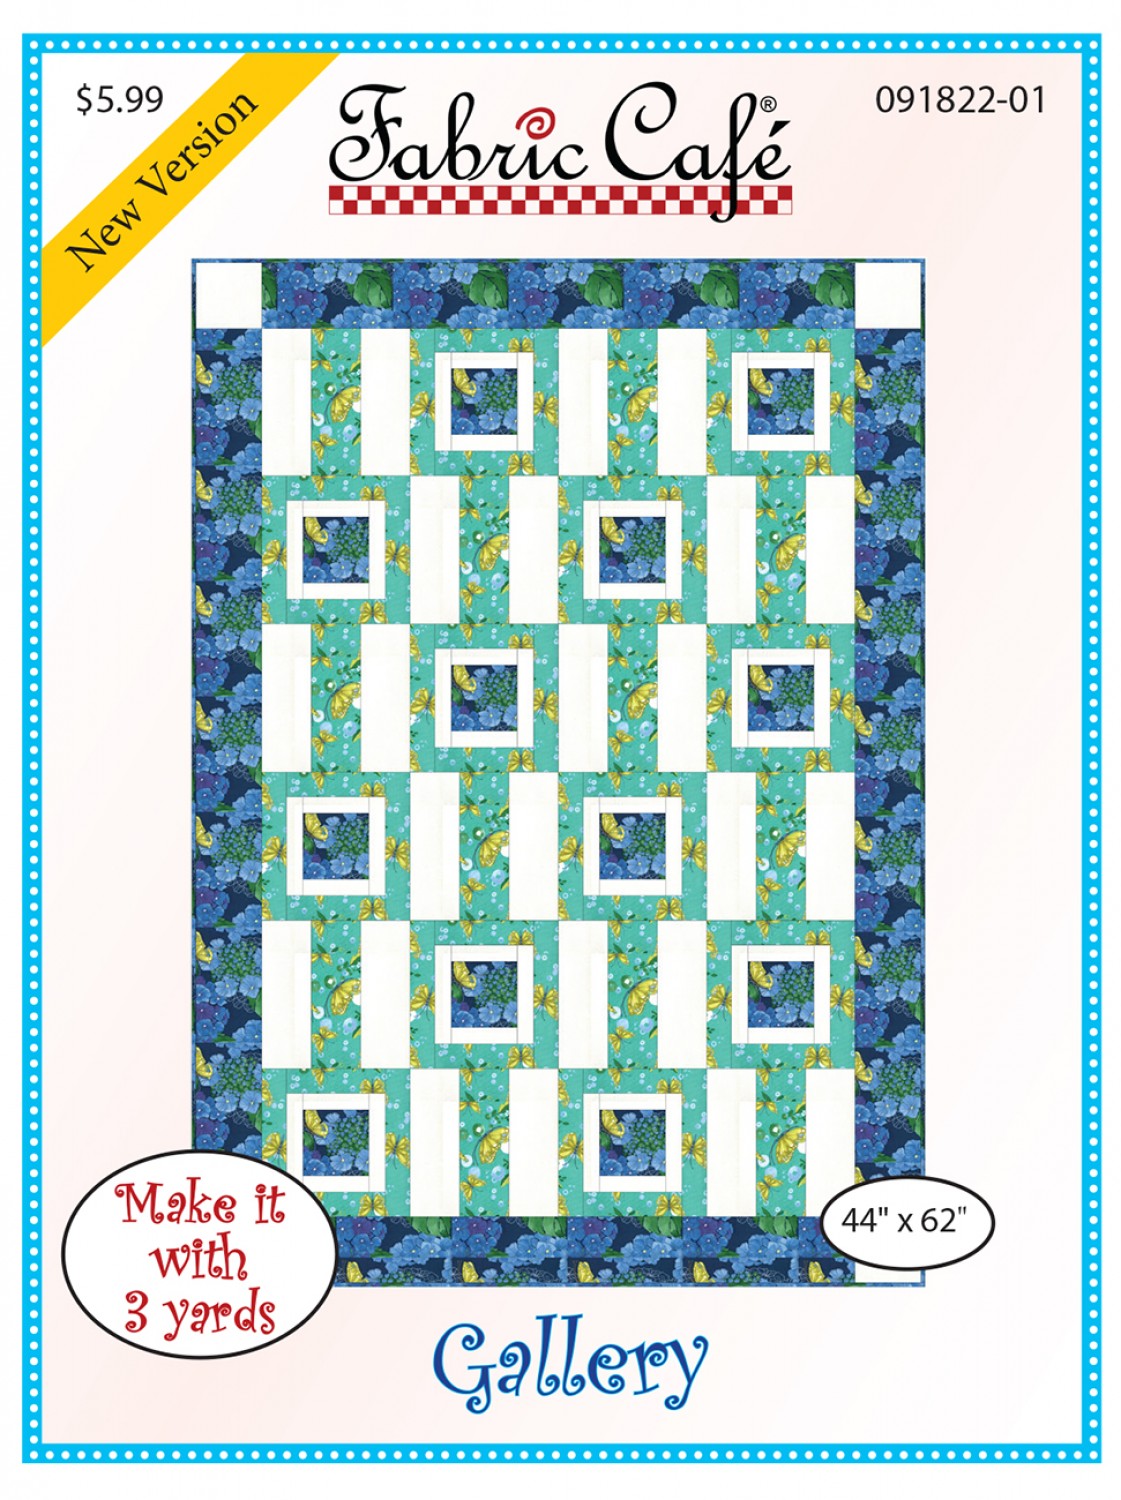 Gallery - Quilt Pattern - Fabric Cafe